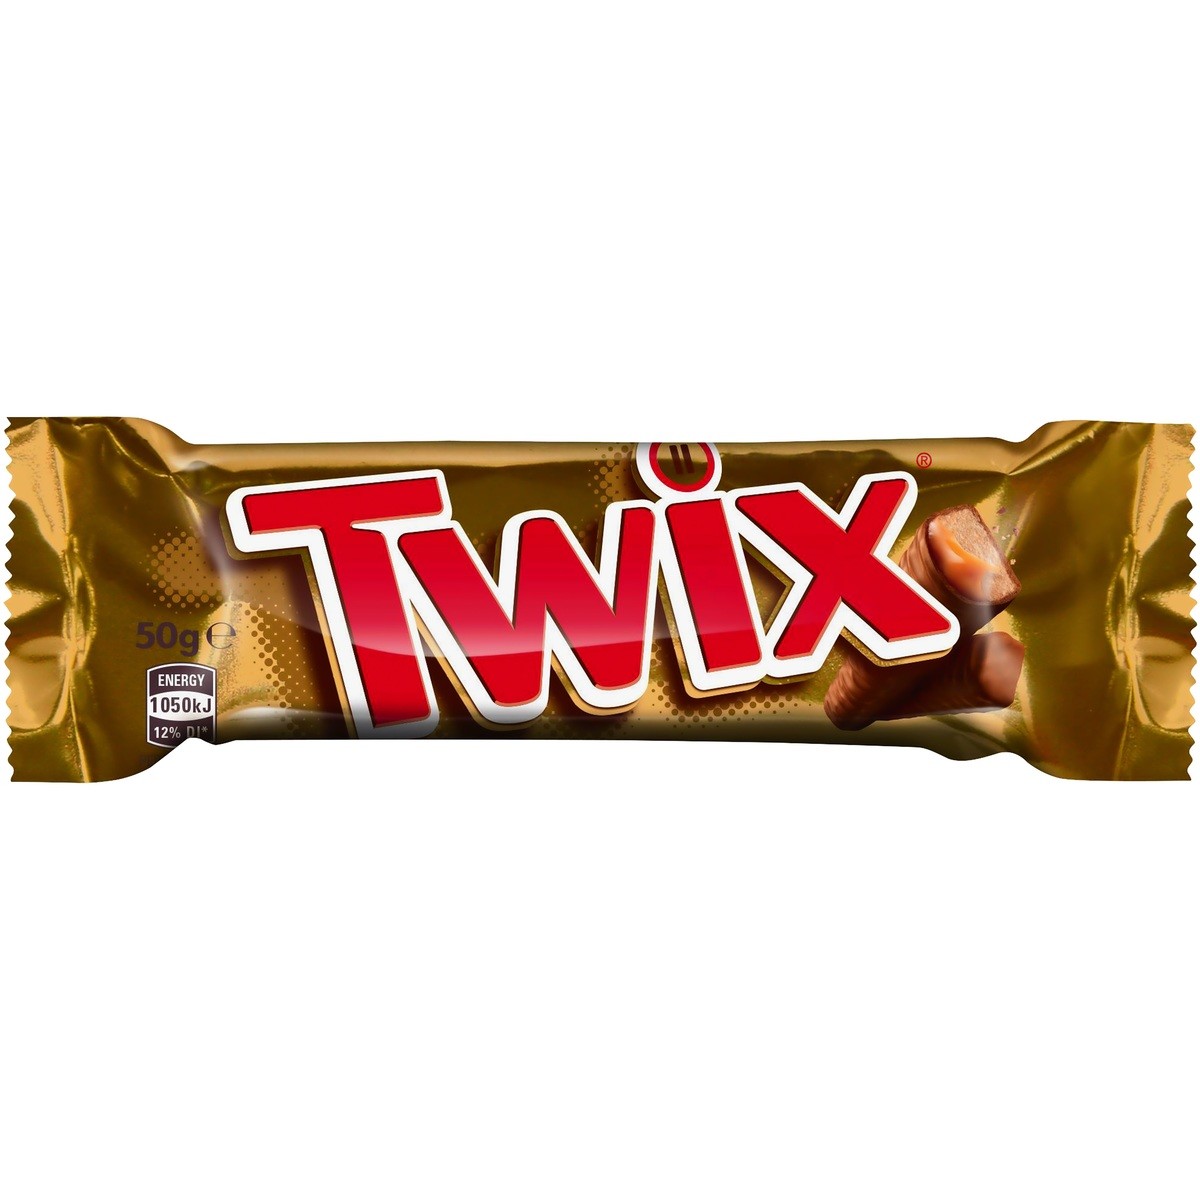 The golden wrapper for Twix displays the inside and outside of the candy.